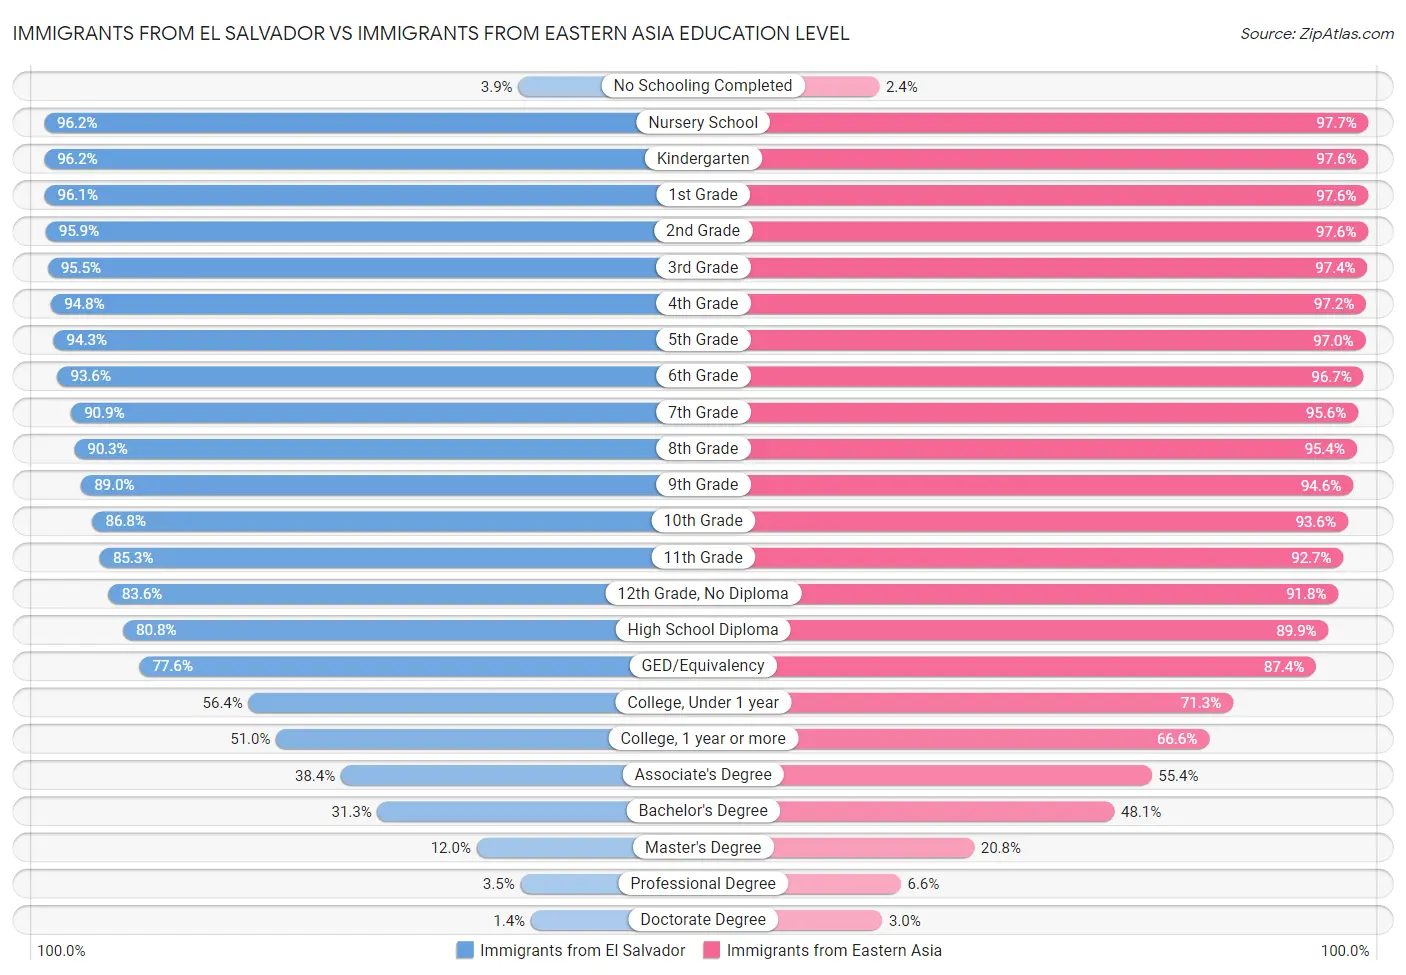 Immigrants from El Salvador vs Immigrants from Eastern Asia Education Level